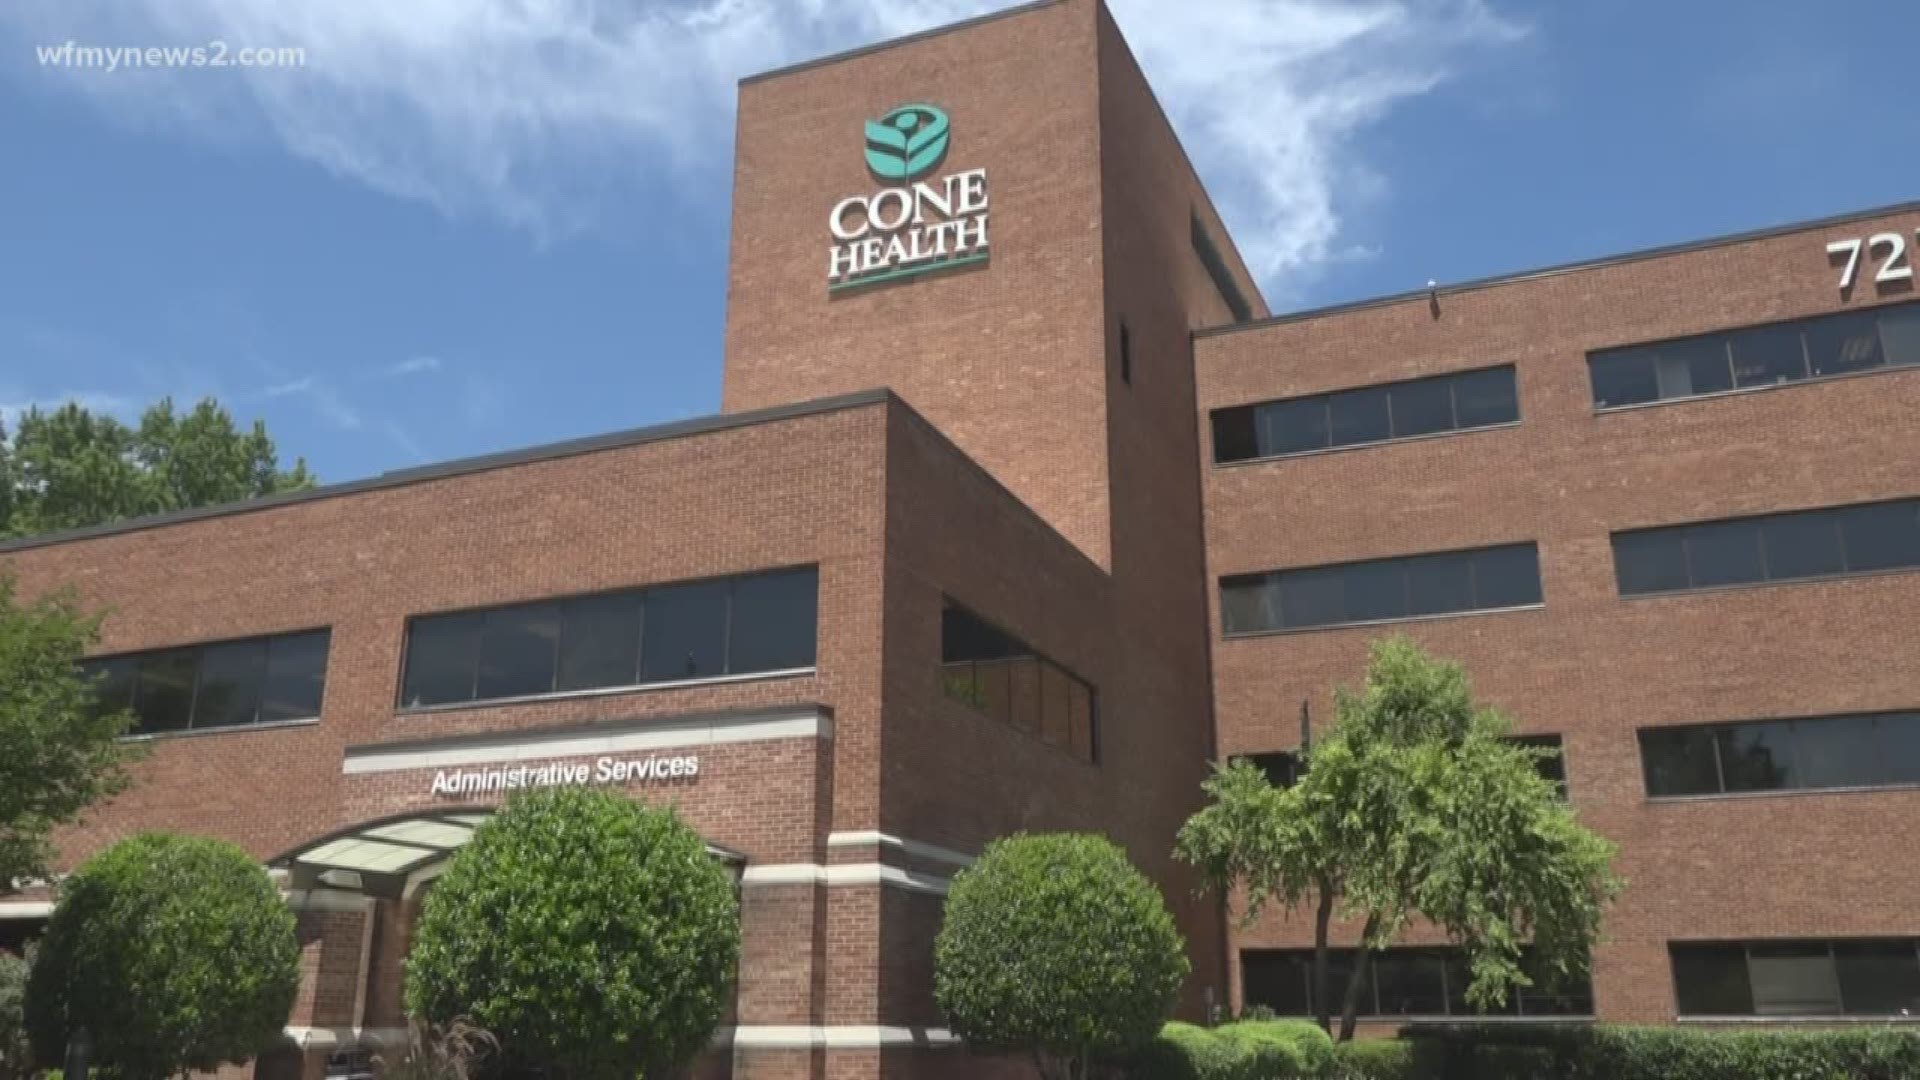 Several emails, including one filled with strong language, were sent to the State Treasurer and other lawmakers as employees voice their displeasure over Cone Health will not join the clear pricing project